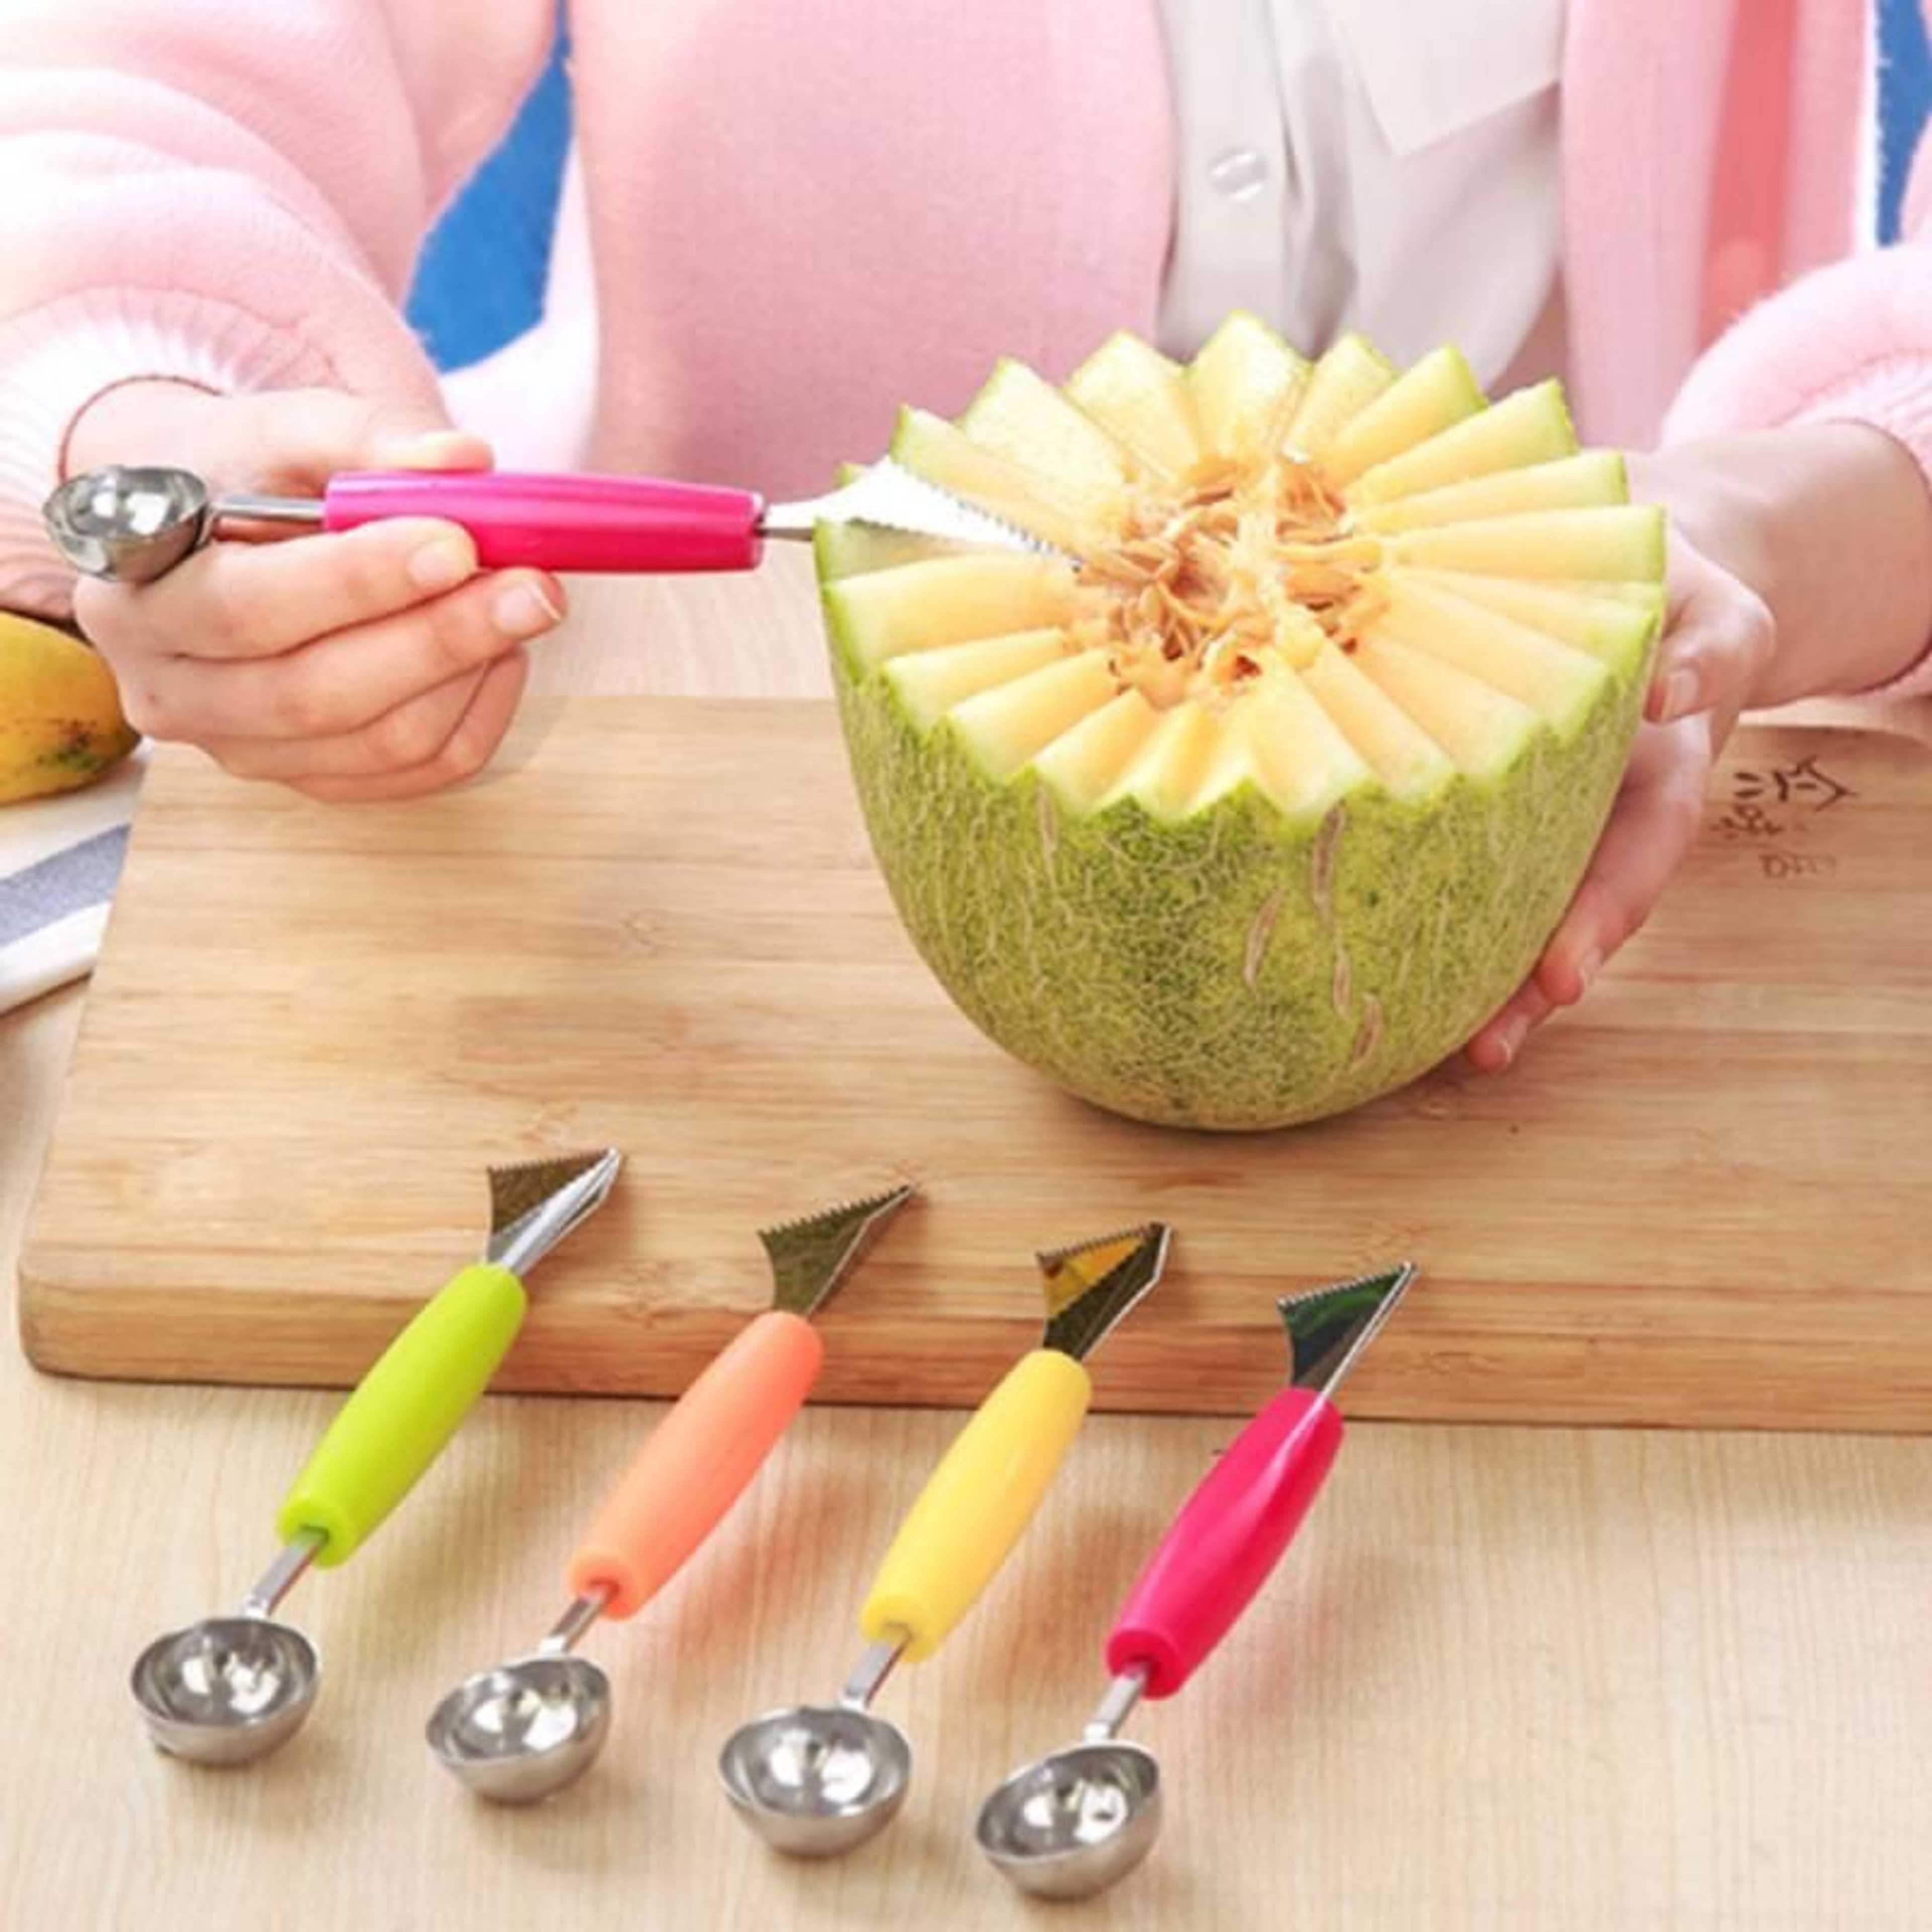 2 in 1 Melon Baller, Stainless Steel Multifunctional Dig Scoop with Fruit Carving Knife, for DIY Fruit Salads, Garnishes and Desserts, Cake, Ice Cream Scooper